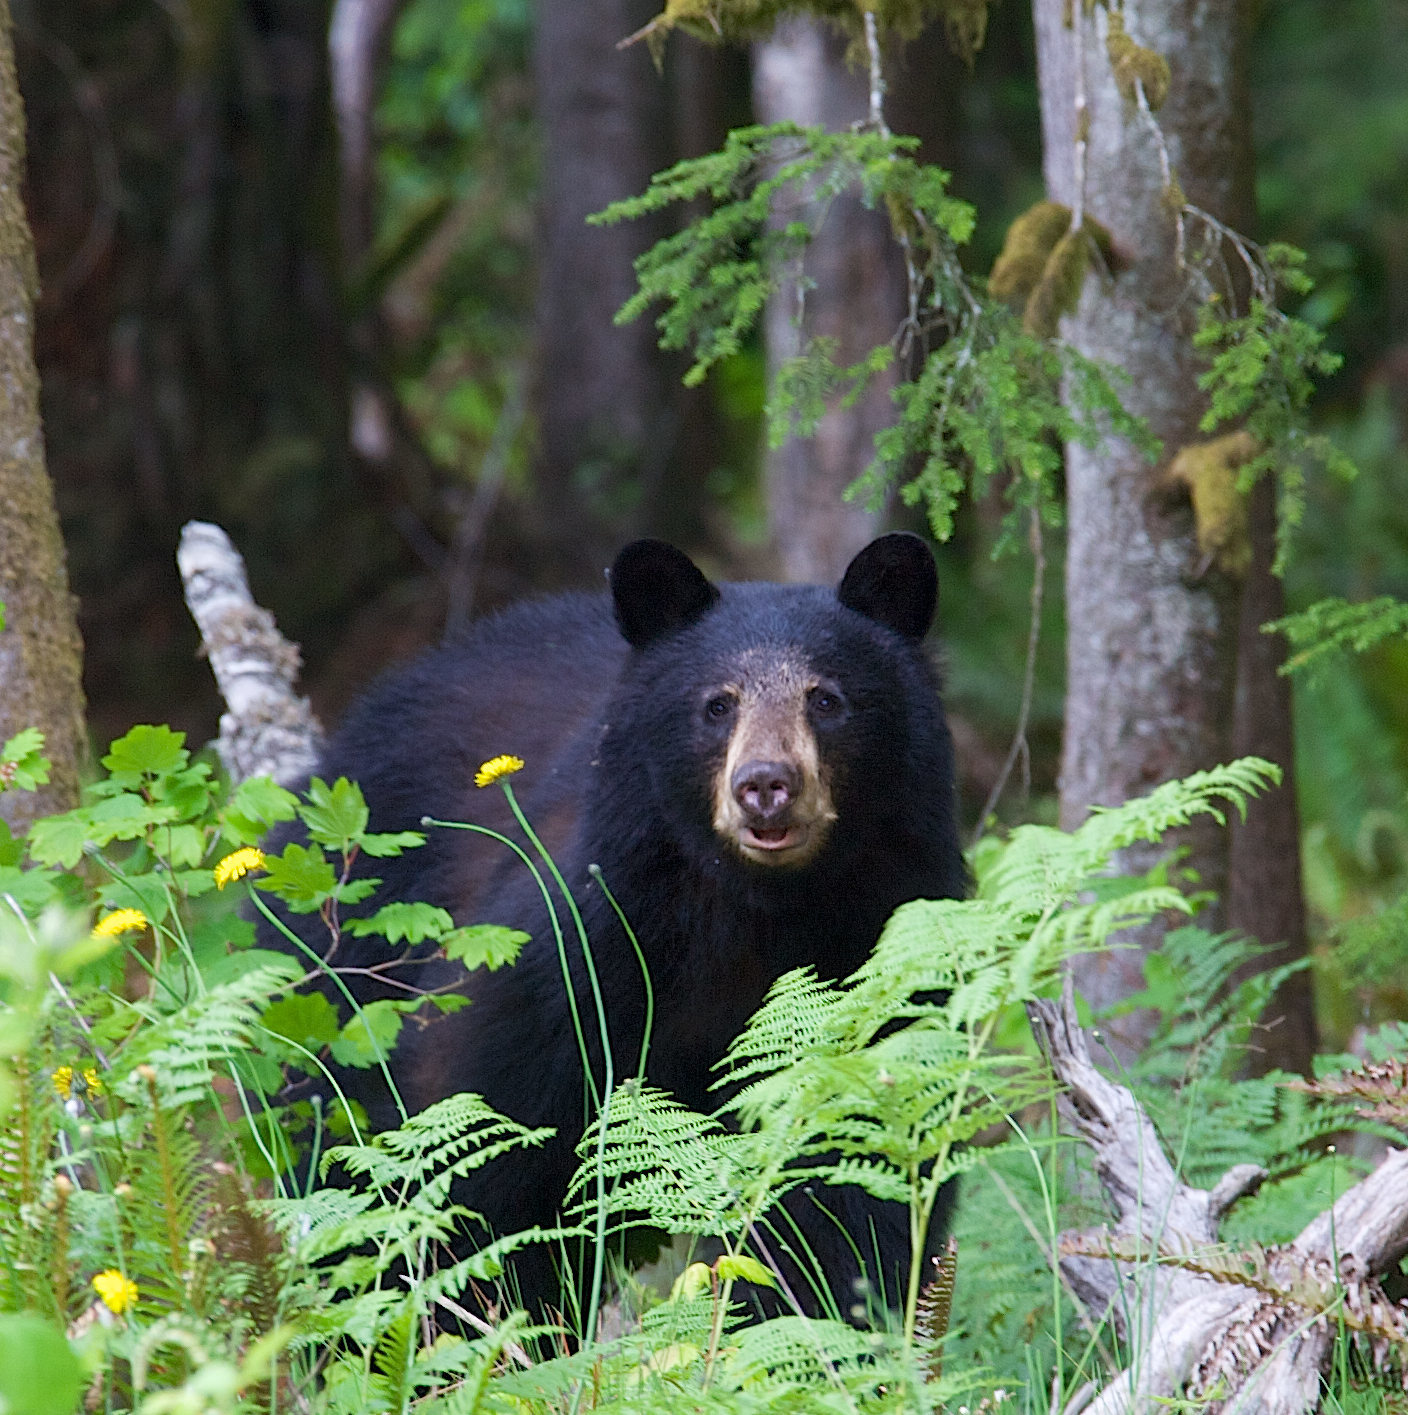 Black bear in a forest in British Columbia Canada